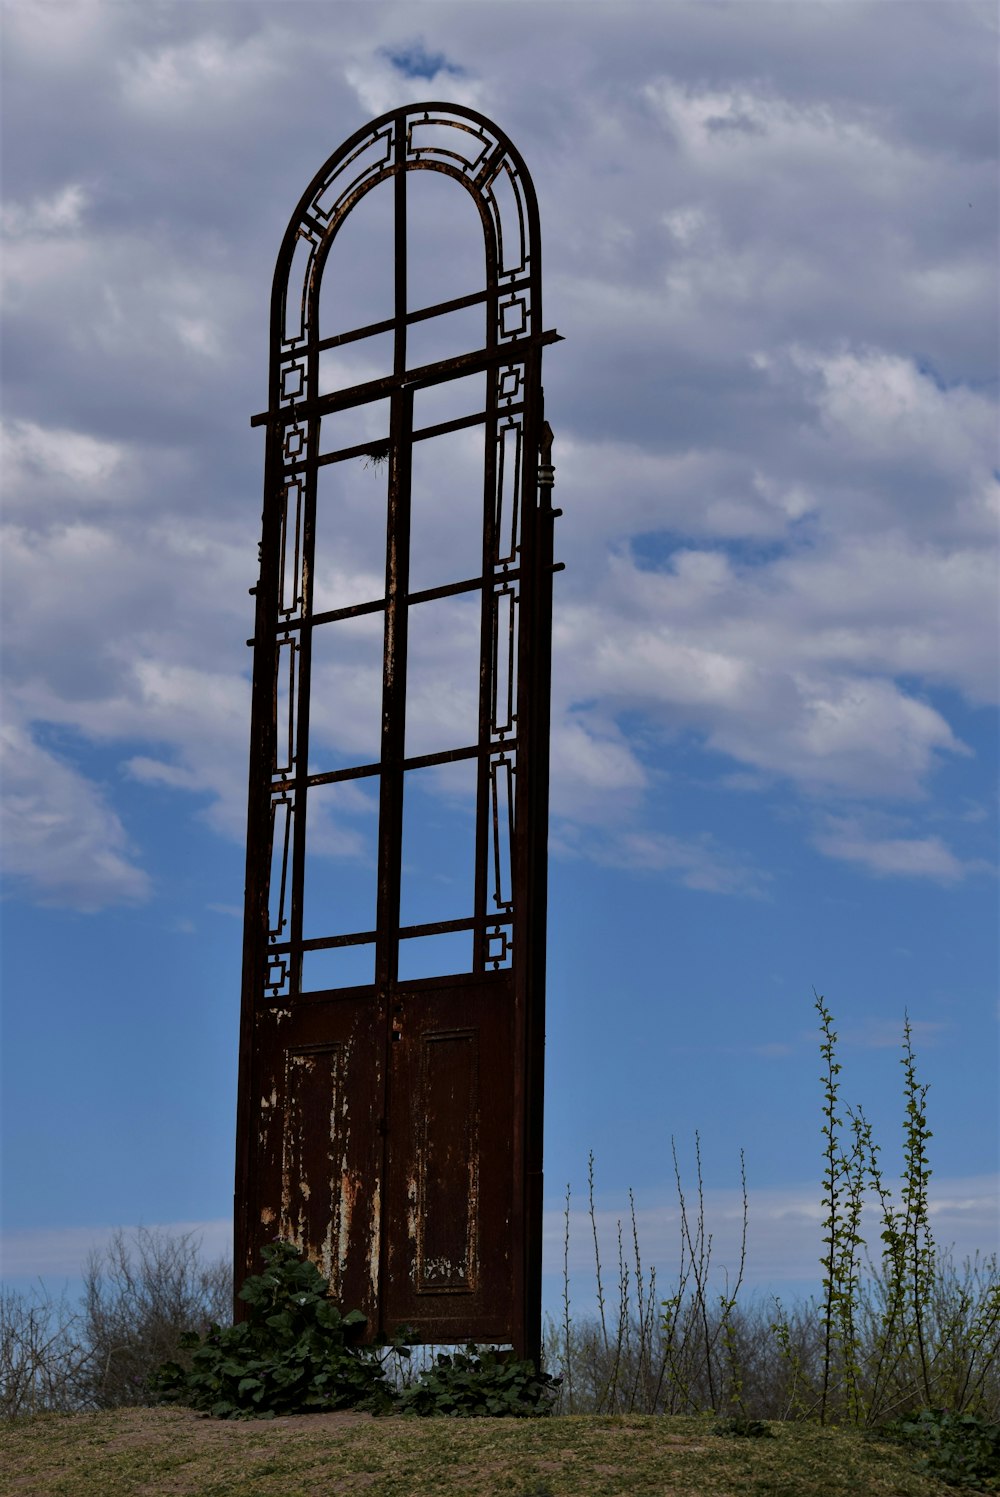 a tall wooden tower